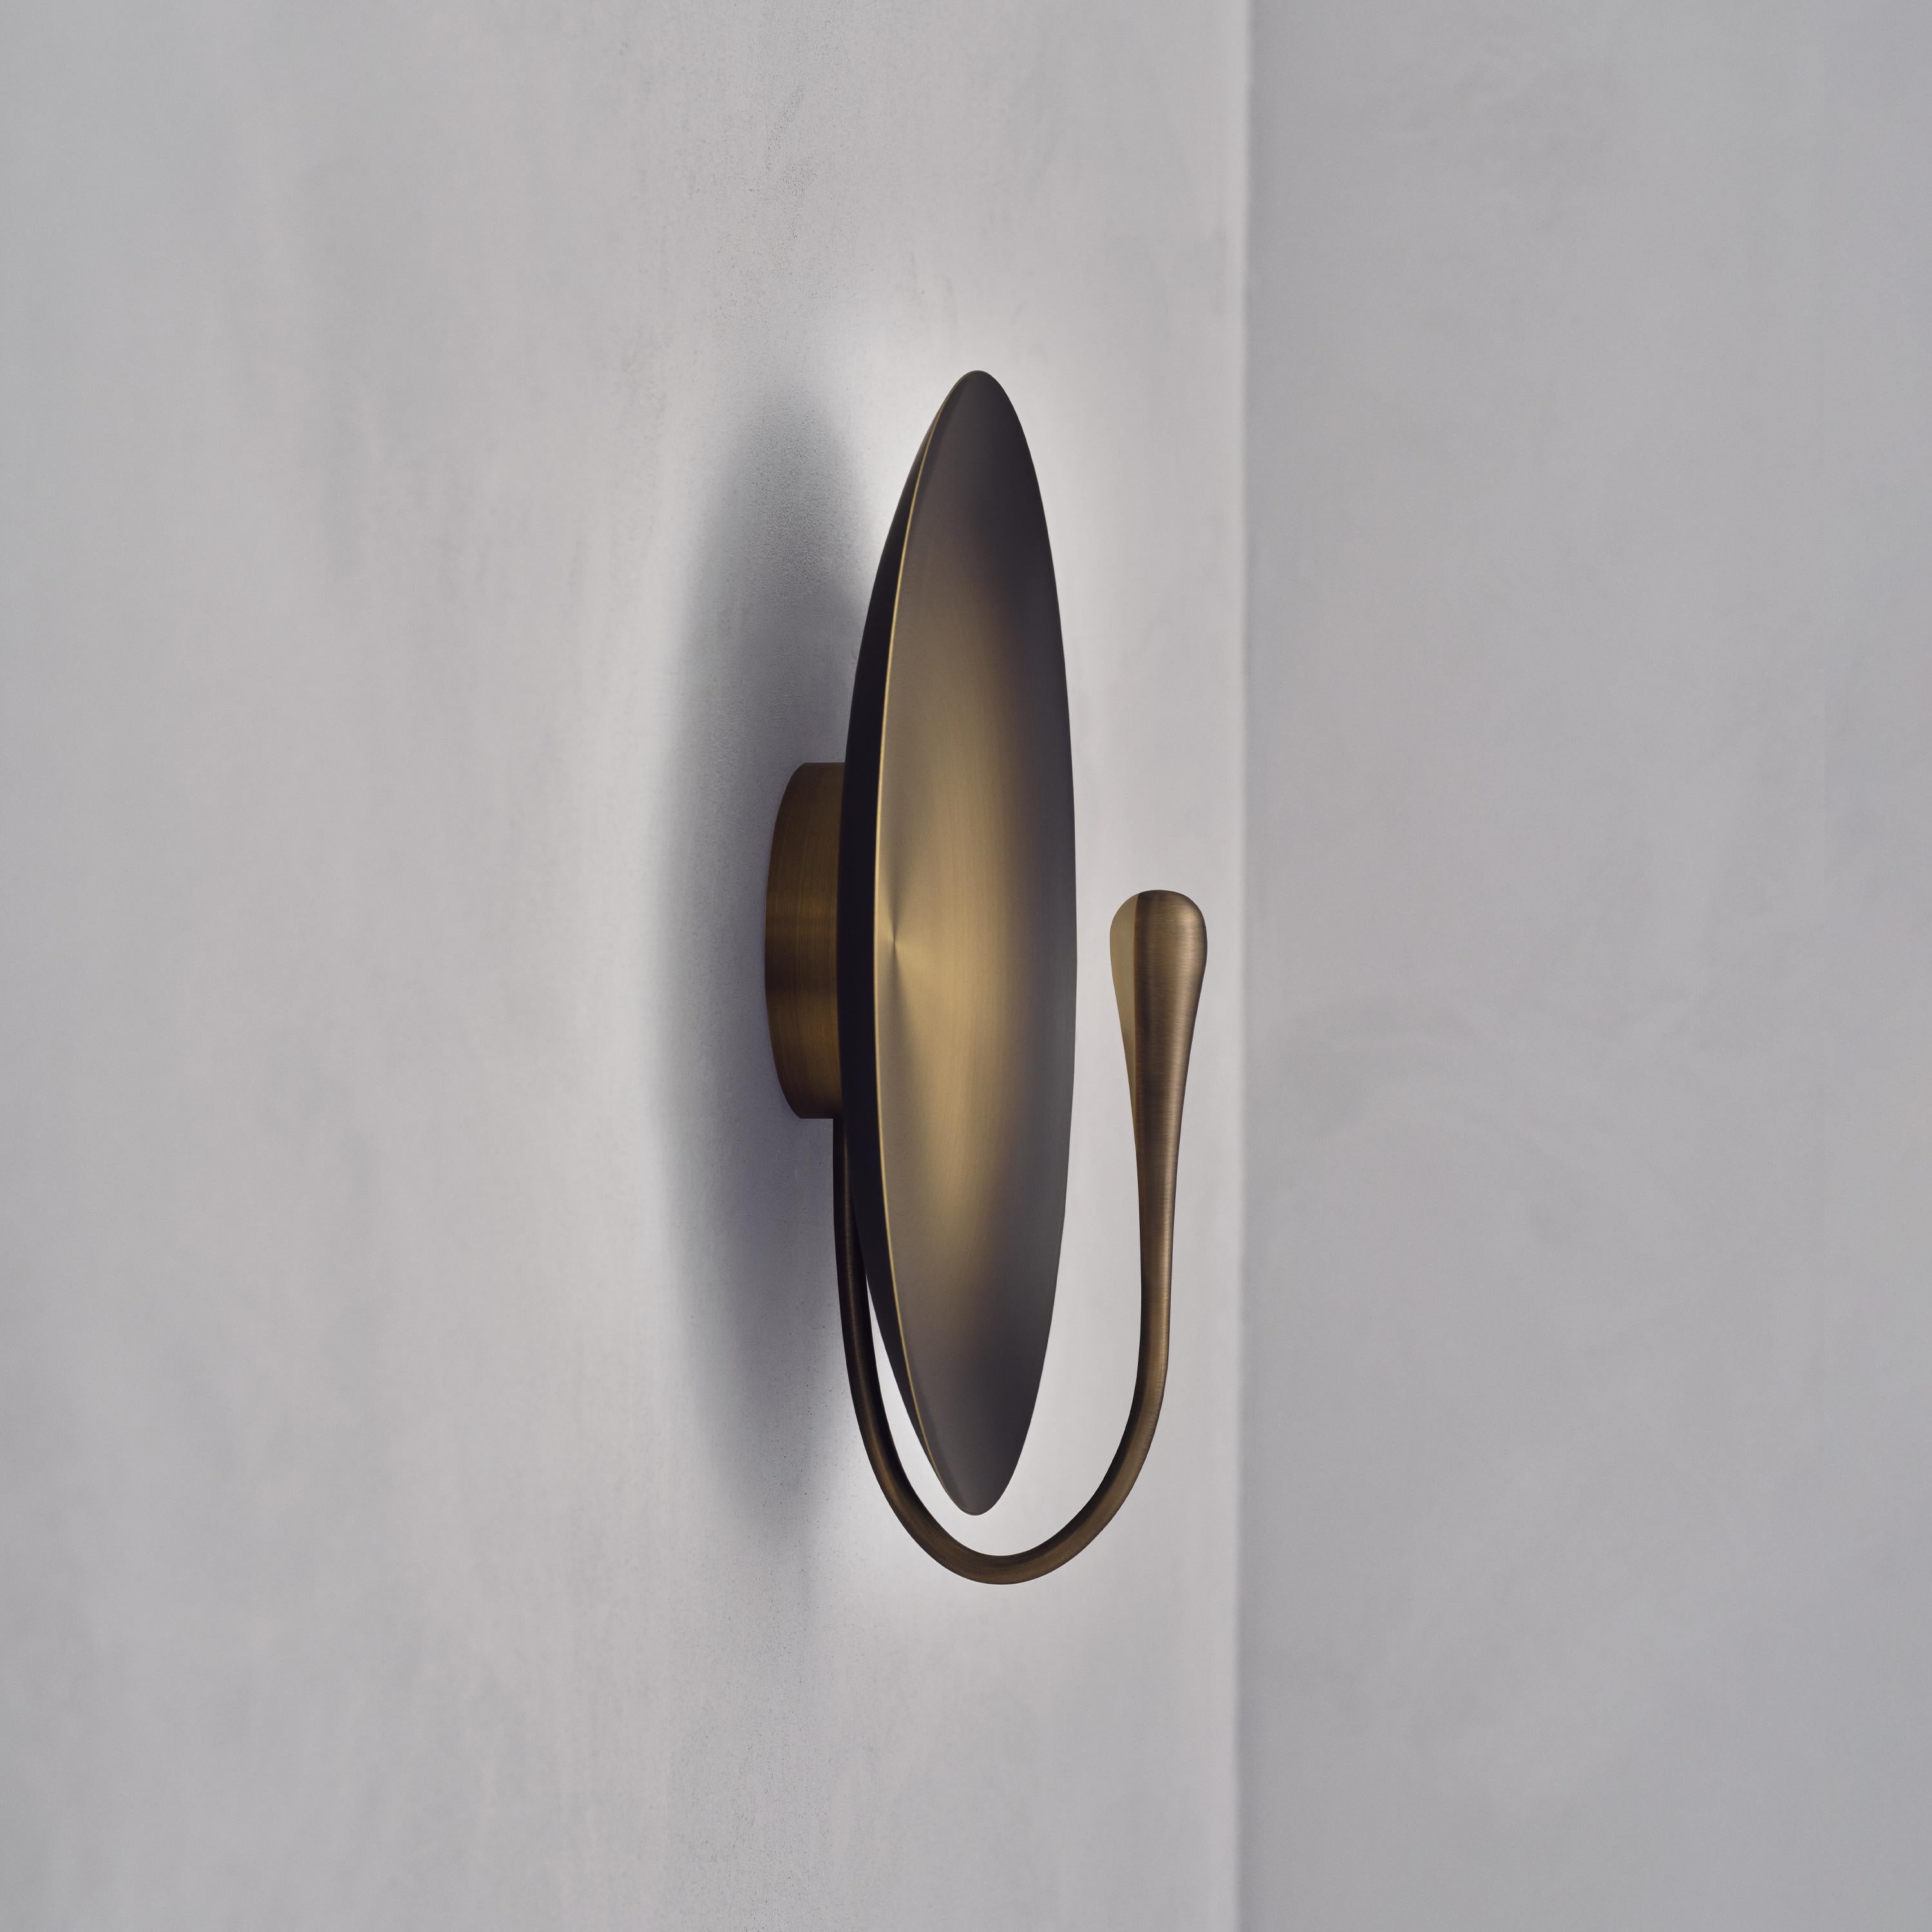 Patinated 'Cosmic Ore' Gradient Patina Satin Brass Handmade Wall Light, Sconce For Sale